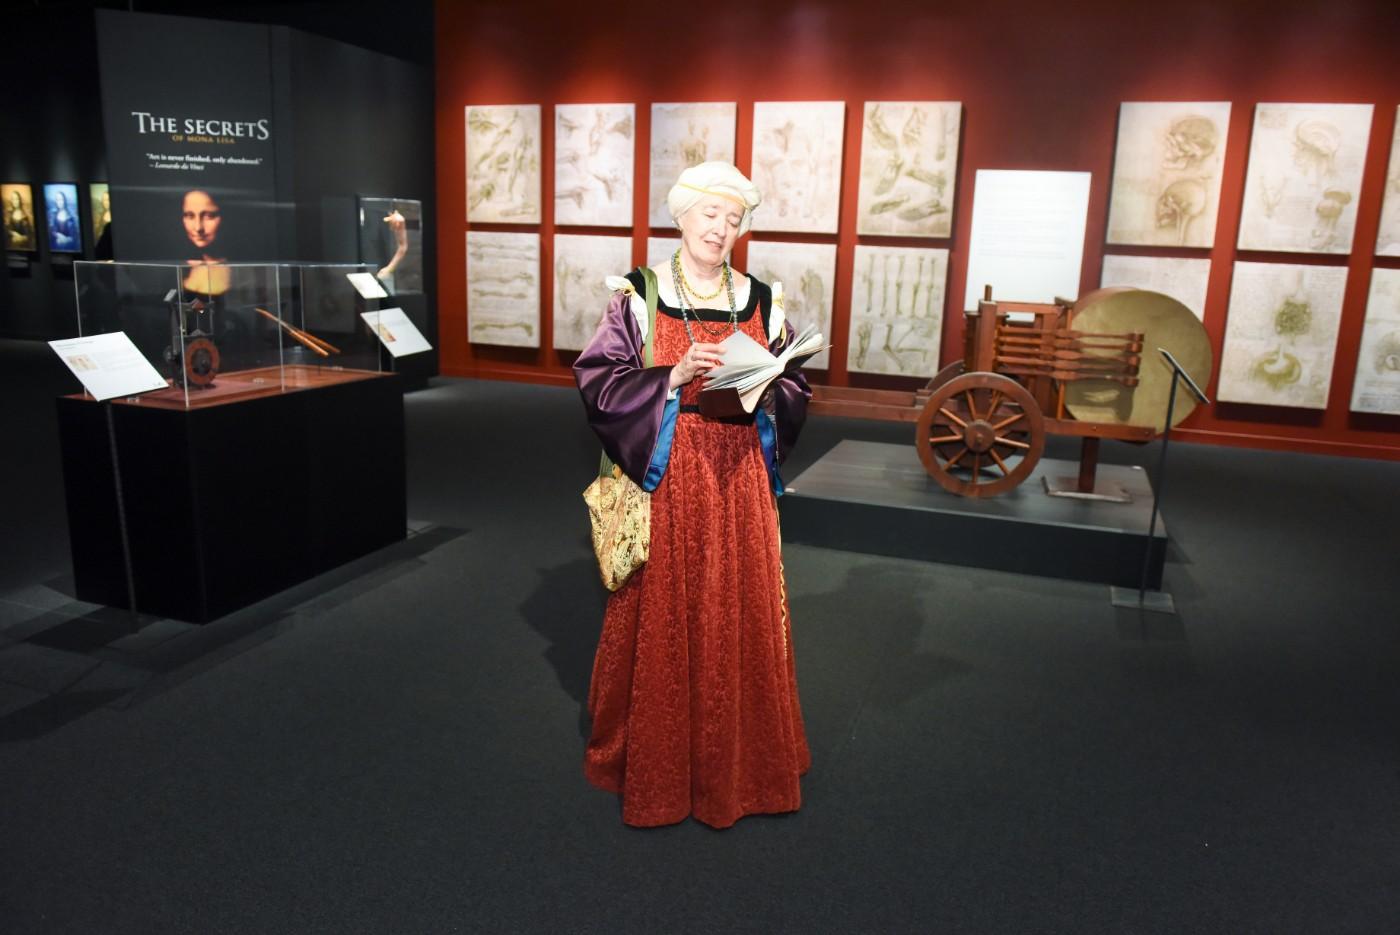 Historical re-enactors in period costumes help visitors get into the Renaissance spirit.